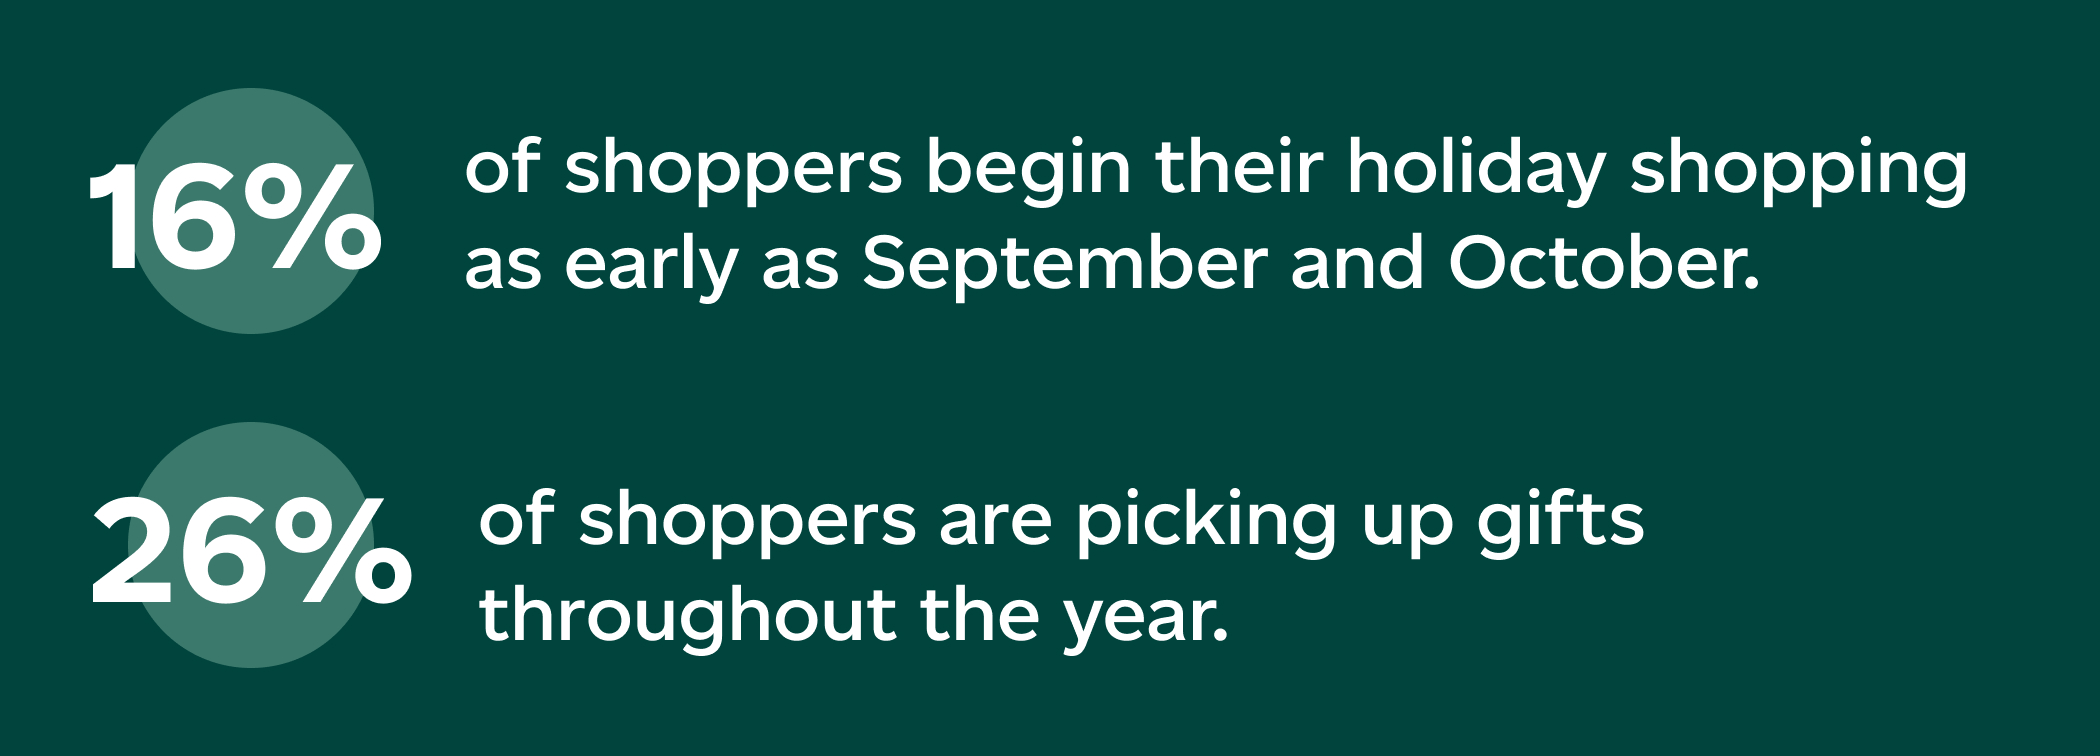 16% of shoppers begin their holiday shopping in September and October. 26% shop throughout the year.